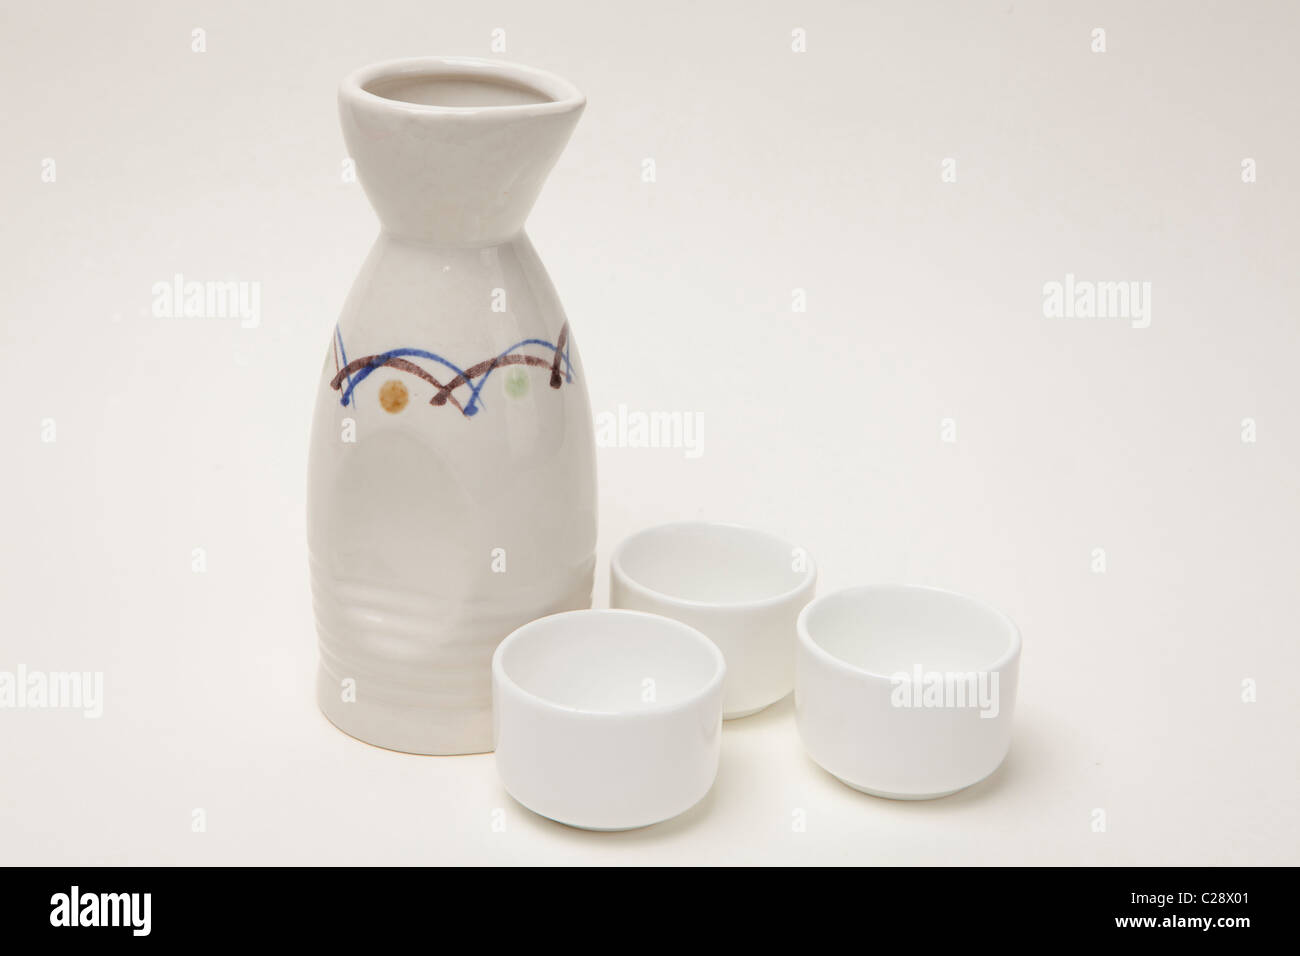 Japanese alcohol Sake bottle and cup, South Korea Stock Photo